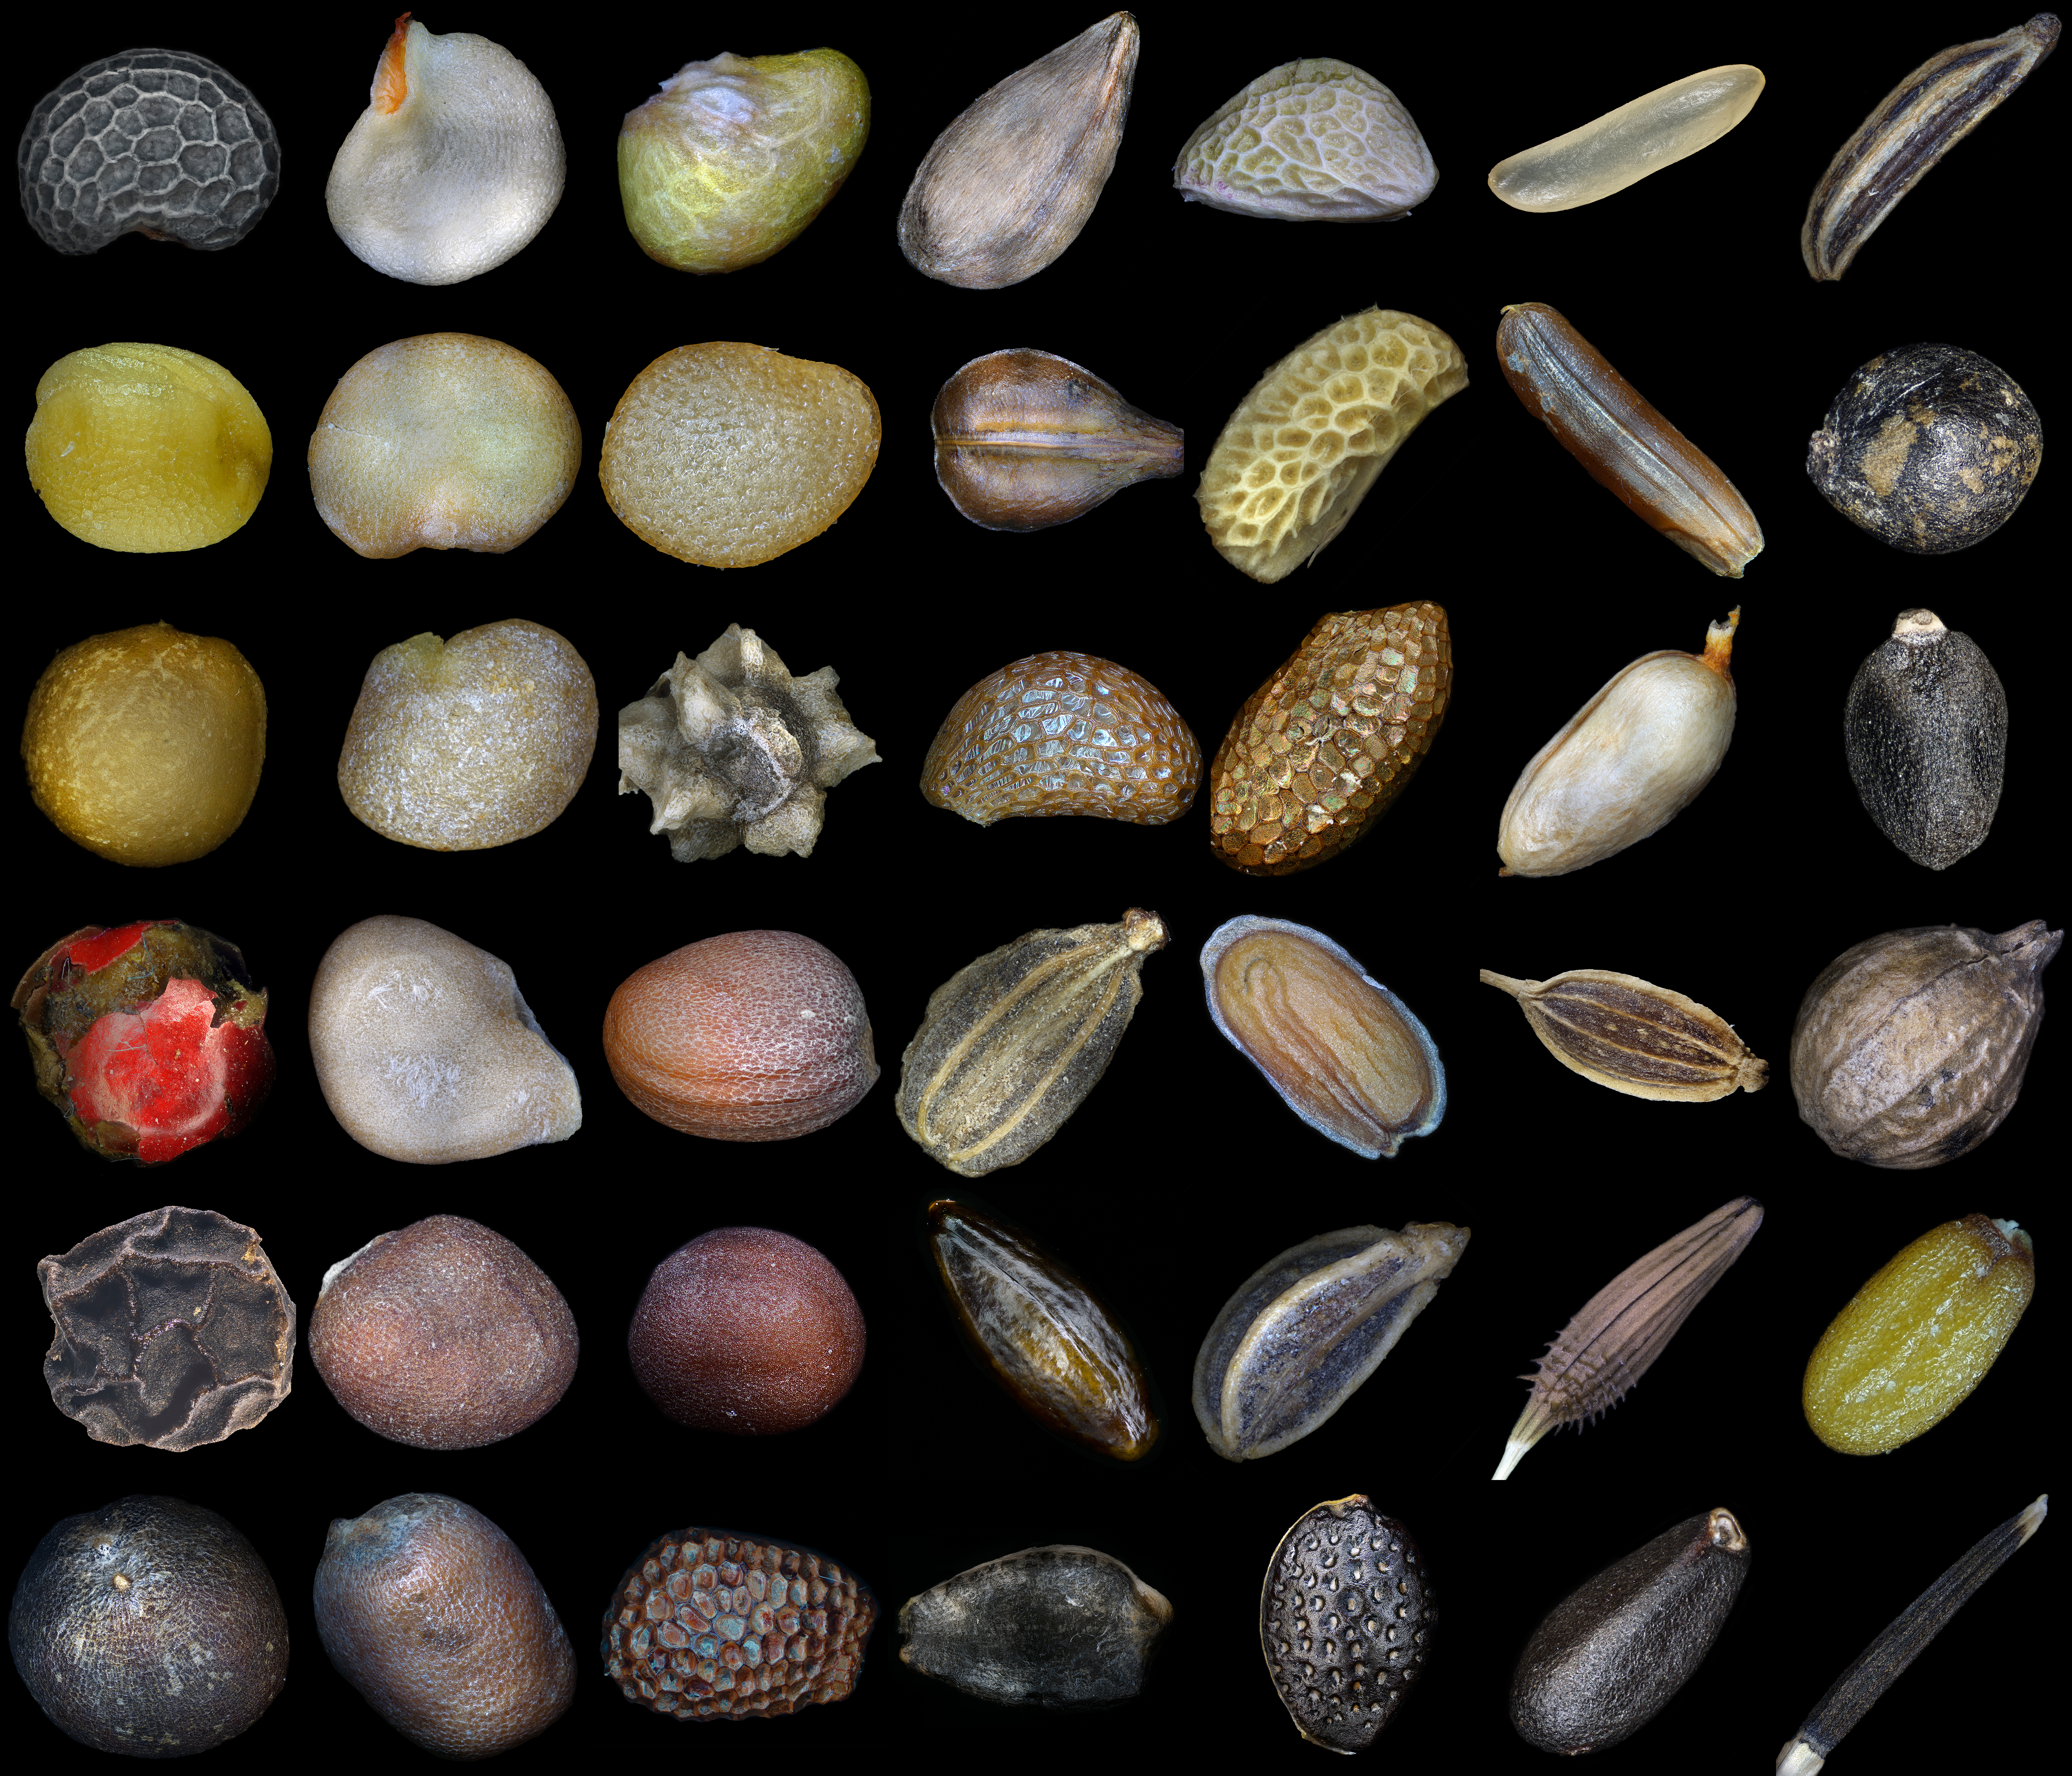 Microimages of seeds of various plants. The first row: Poppy, Red pepper, Strawberry, Apple tree, Blackberry, Rice, Carum. Second row: Mustard, Eggplant, Physalis, grapes, raspberries, red rice, Patchouli. The third row: Figs, Lycium barbarum, Beets, Blueberries, Golden Kiwifruit, Rosehip, Basil. The fourth row: Pink pepper, Tomato, Radish, Carrot, Matthiola, Dill, Coriander Fifth row: Black pepper, White cabbage, Napa cabbage, Seabuckthorn, Parsley, Dandelion, Capsella bursa-pastoris. The sixth row: Cauliflower, Radish, Kiwifruit, Grenadilla, Passion fruit, Melissa, Tagetes erecta.